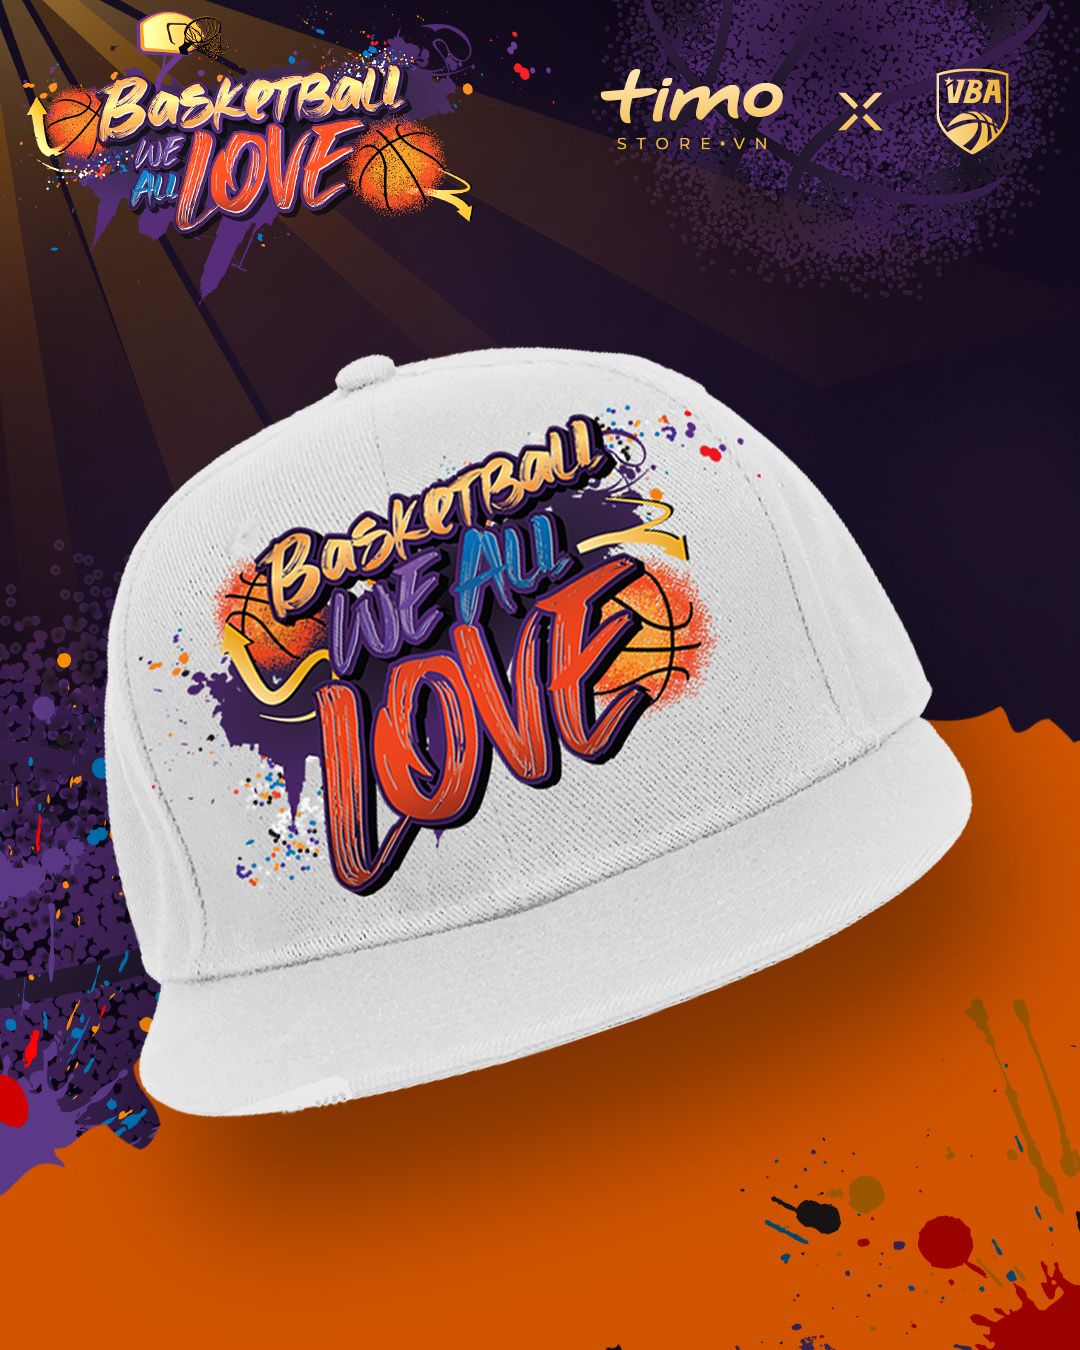  SNAPBACK BASKETBALL WE ALL LOVE - TIMOSTORE x VBA COLLECTION 